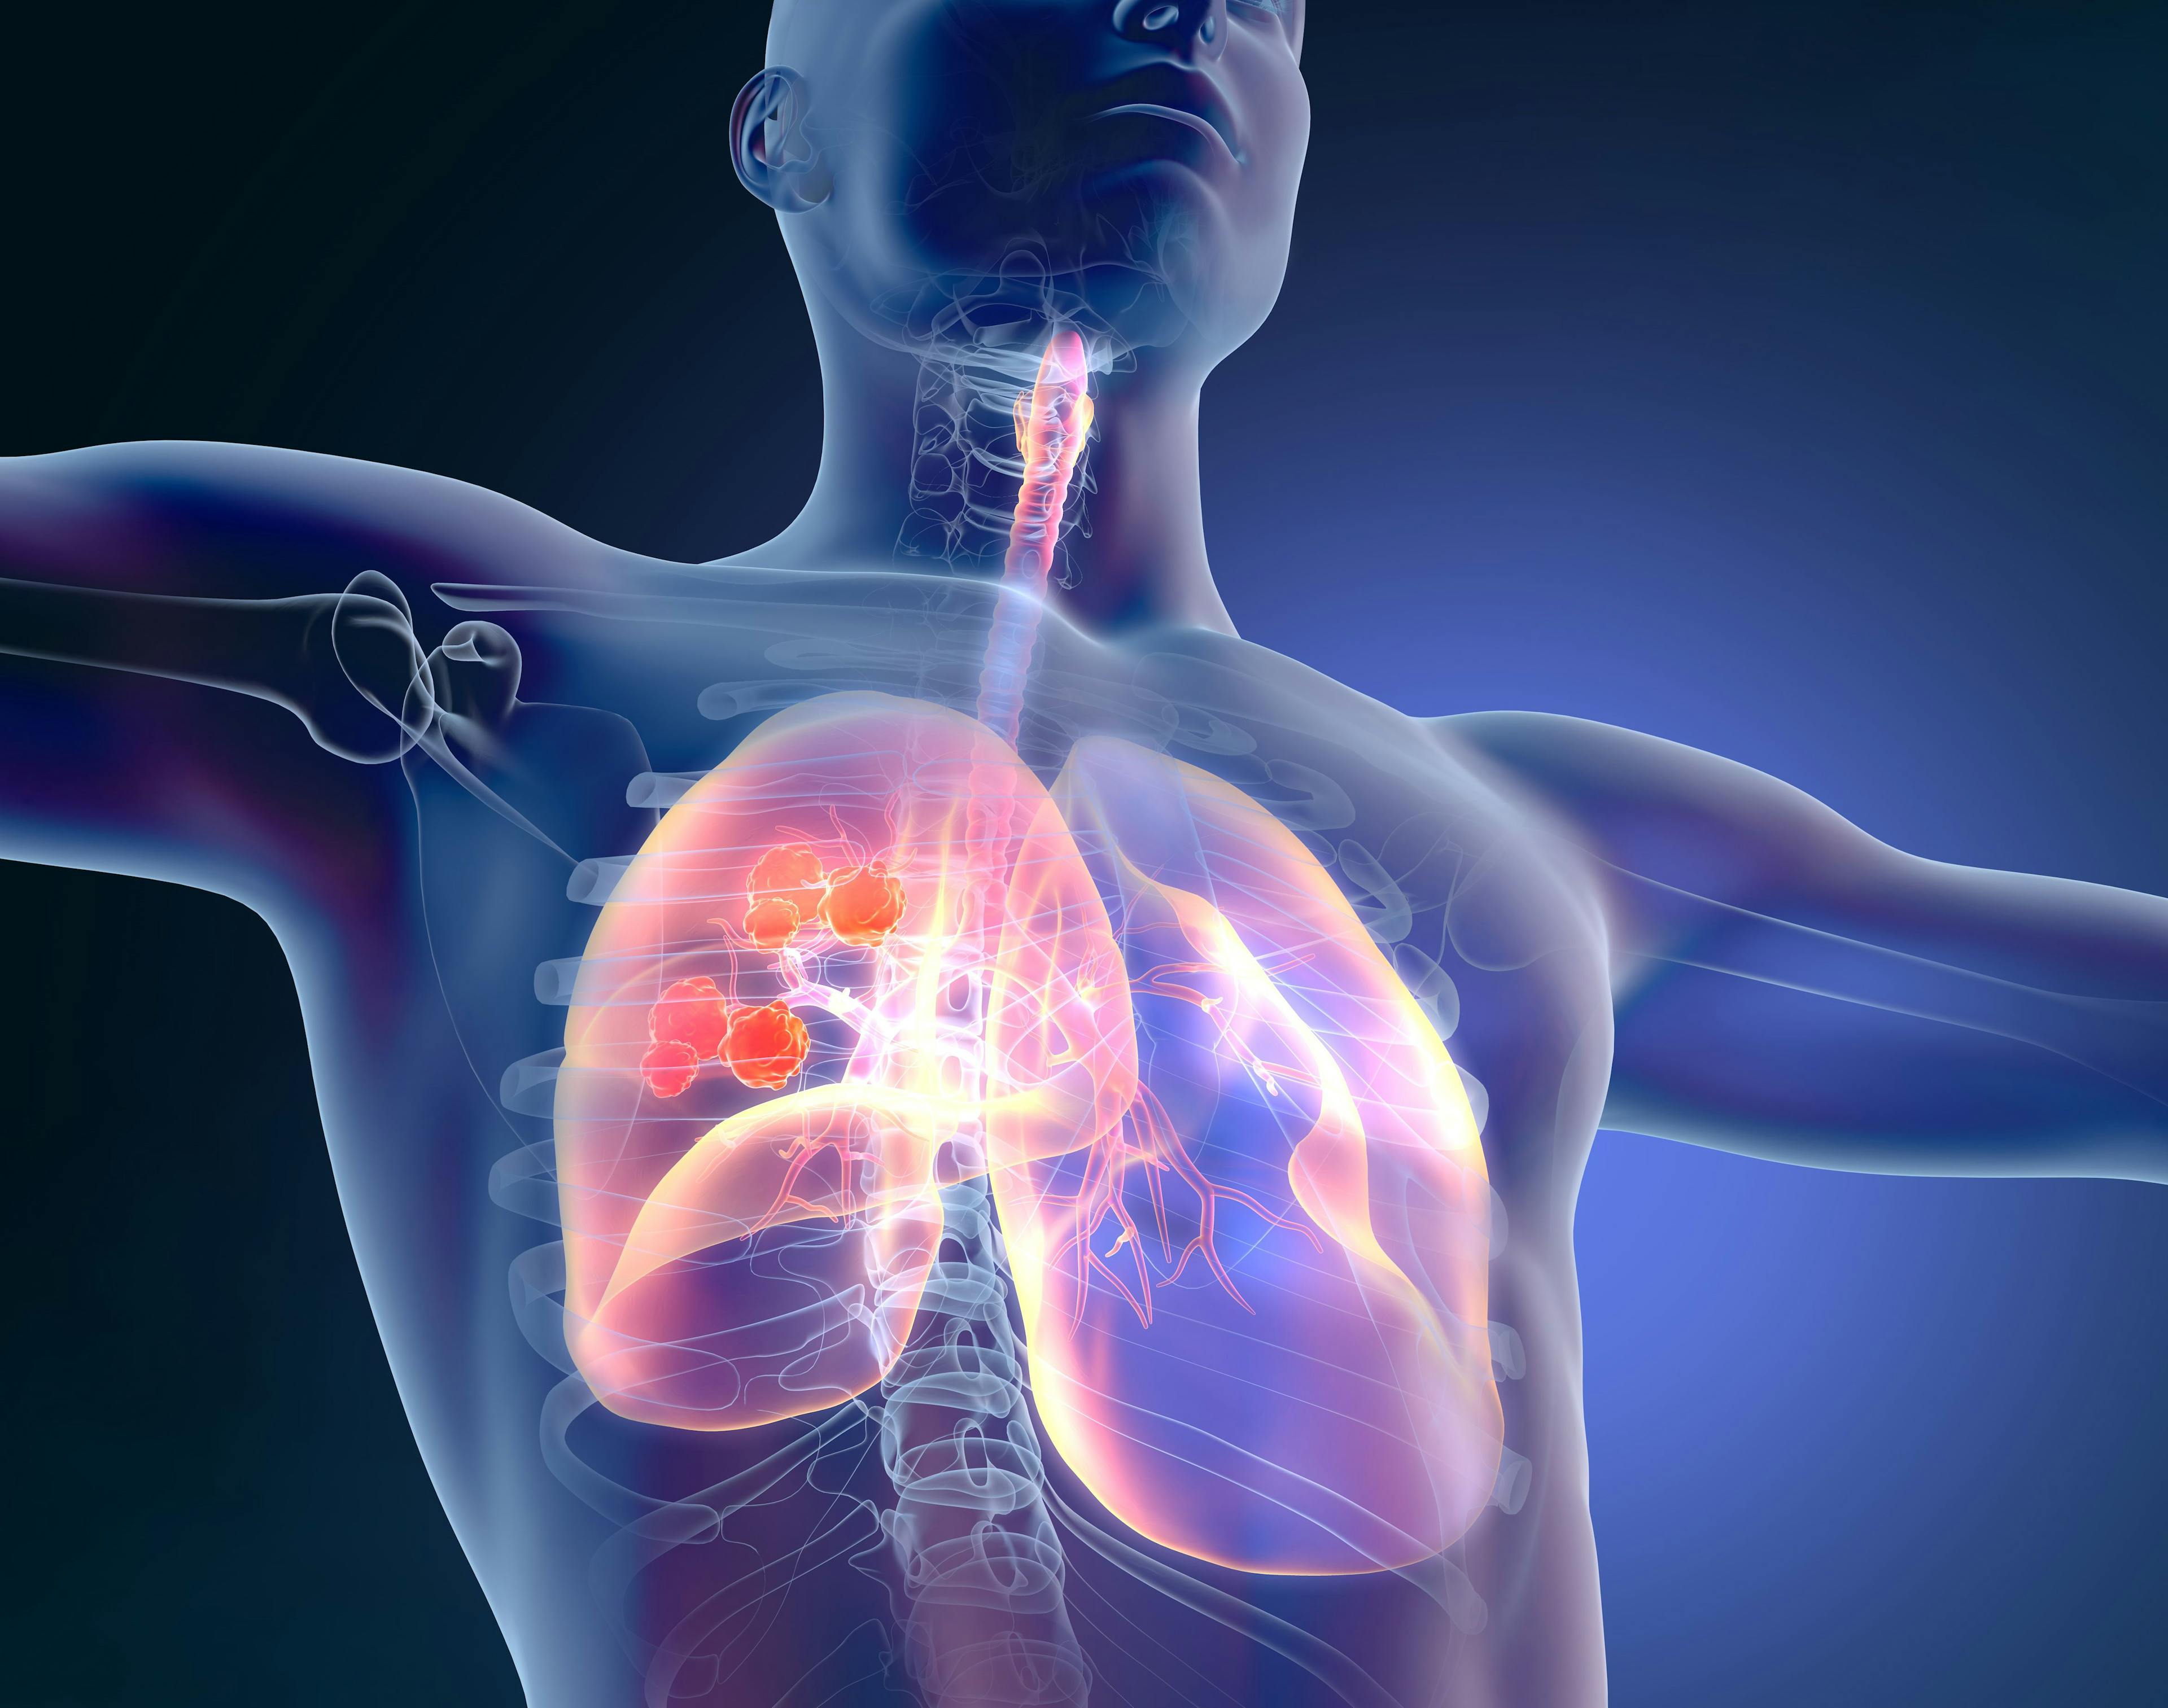 Novartis Releases Positive Phase 1b/2 Clinical Data for JDQ443 for Treatment of NSCLC